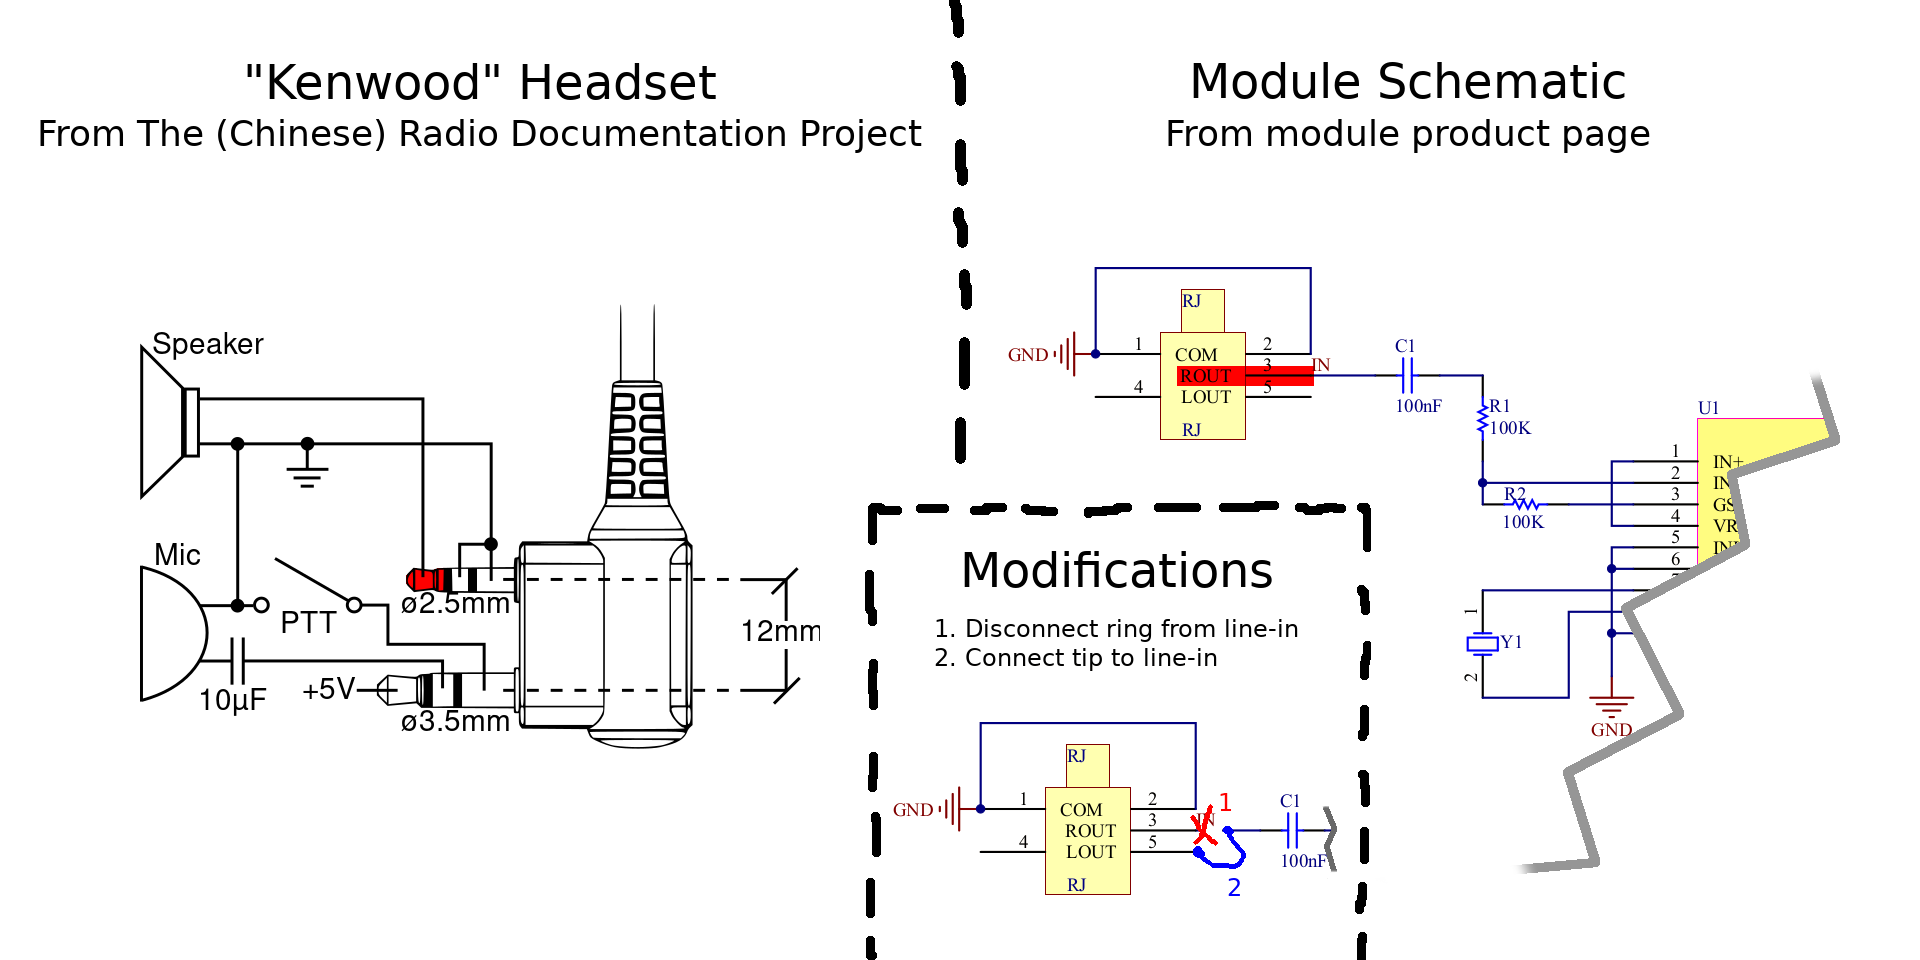 Kenwood headset compatibility schematic